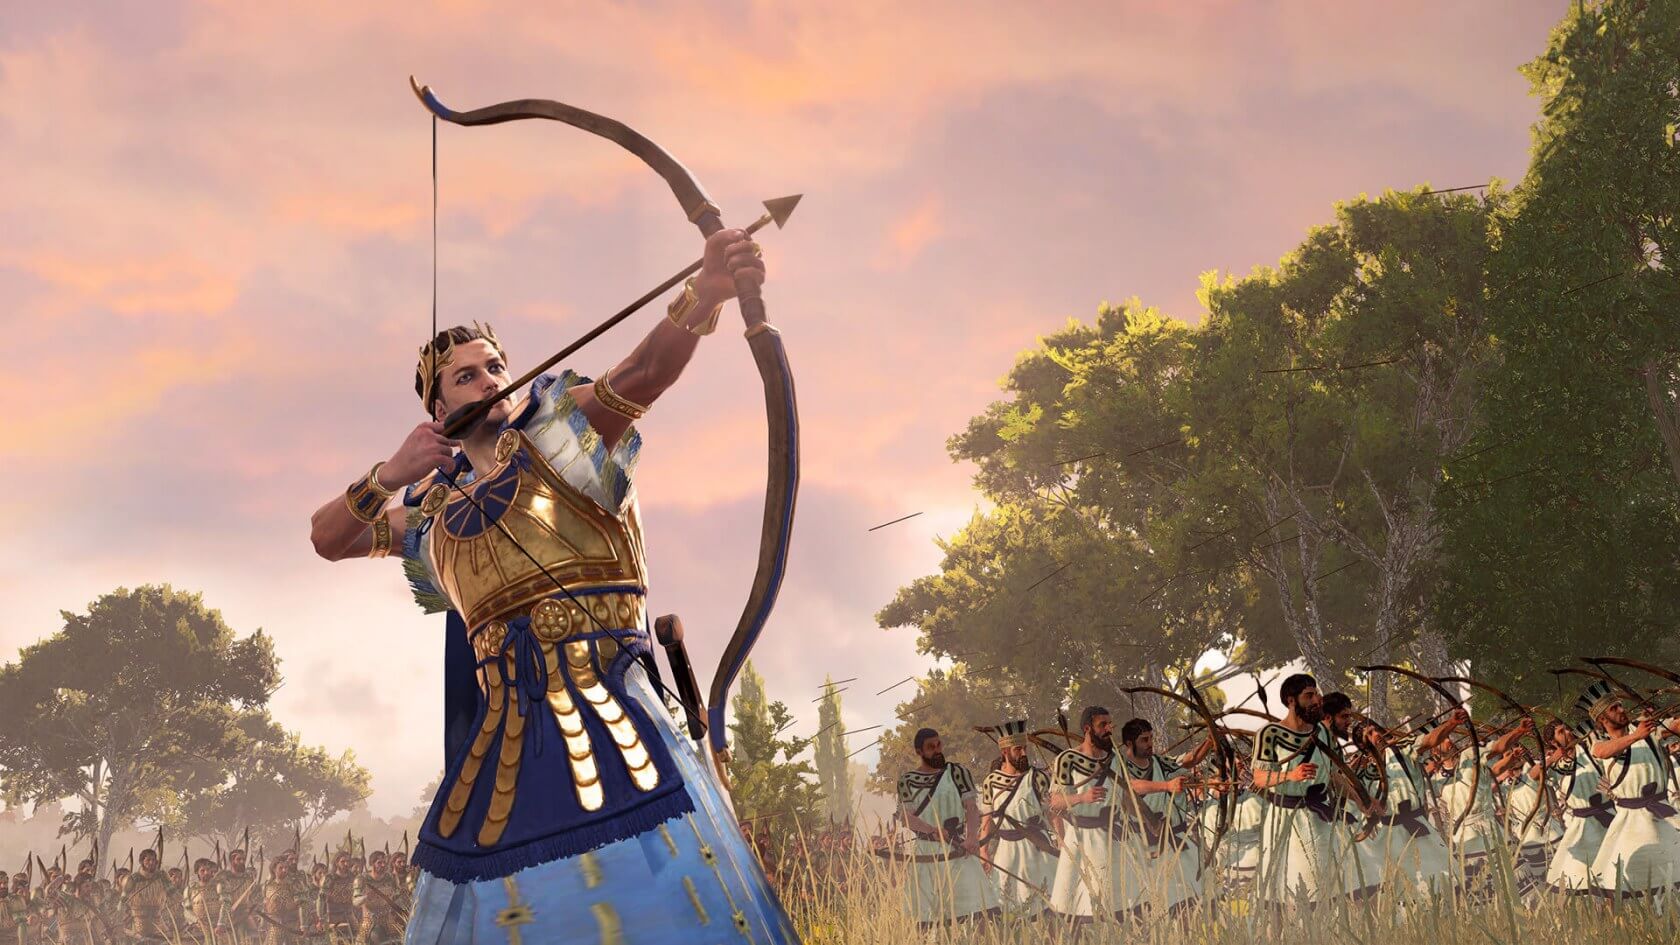 Total War Saga: Troy is free on the Epic Games Store for 24 hours